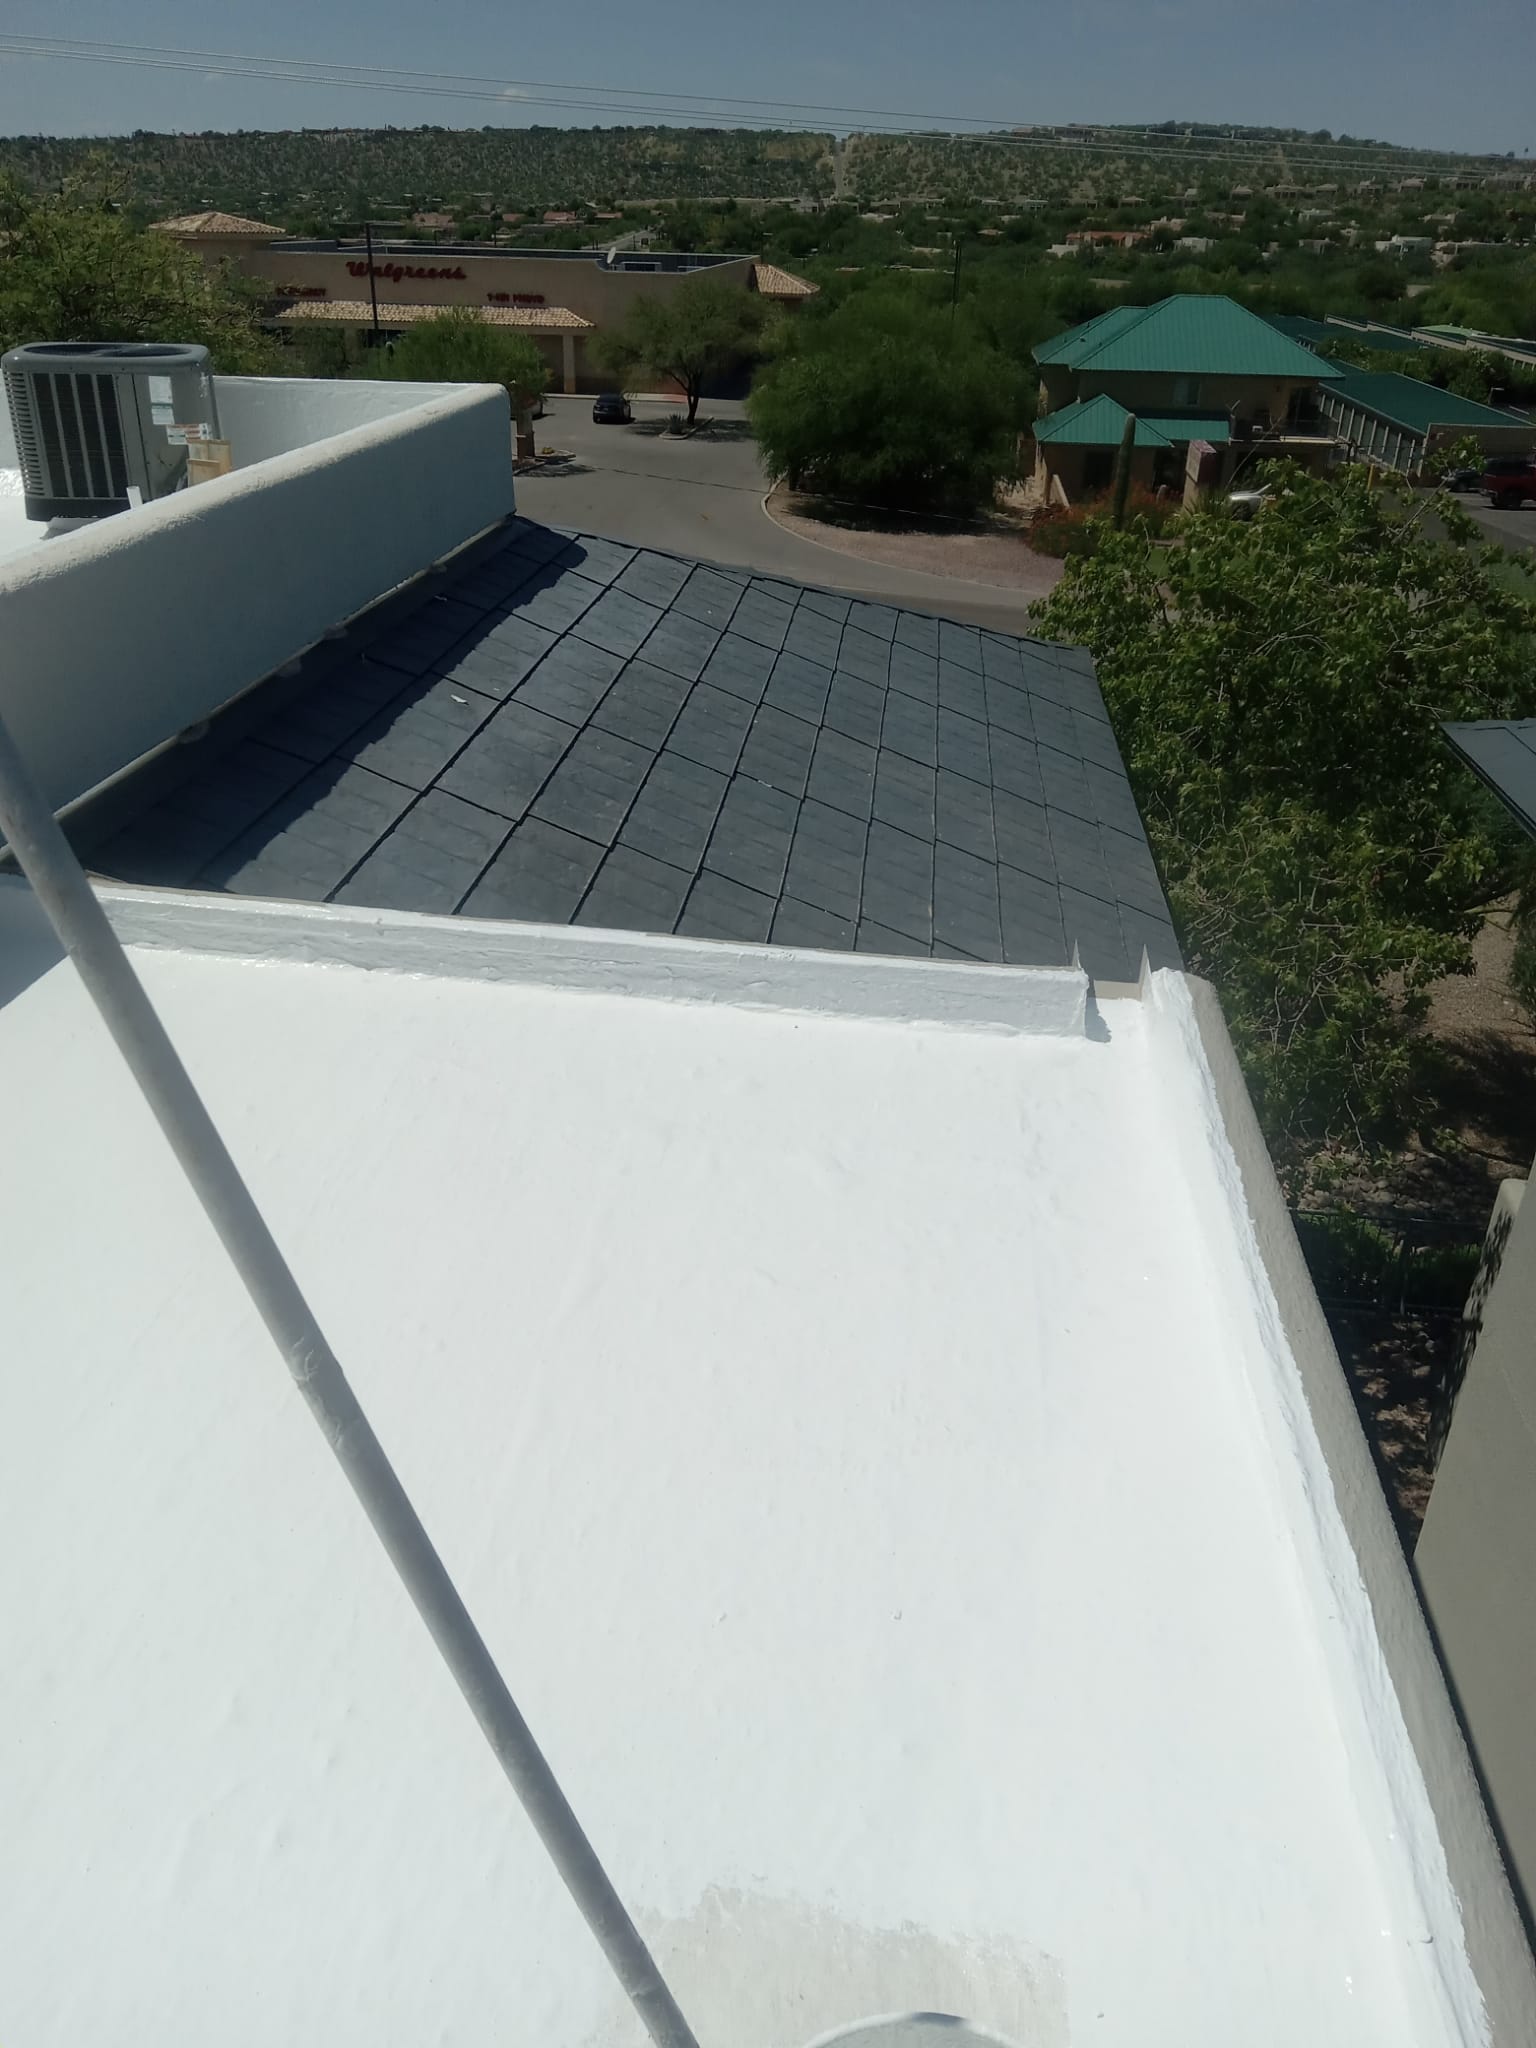 Estancia home displaying a roof with half spray foam and half traditional tile.